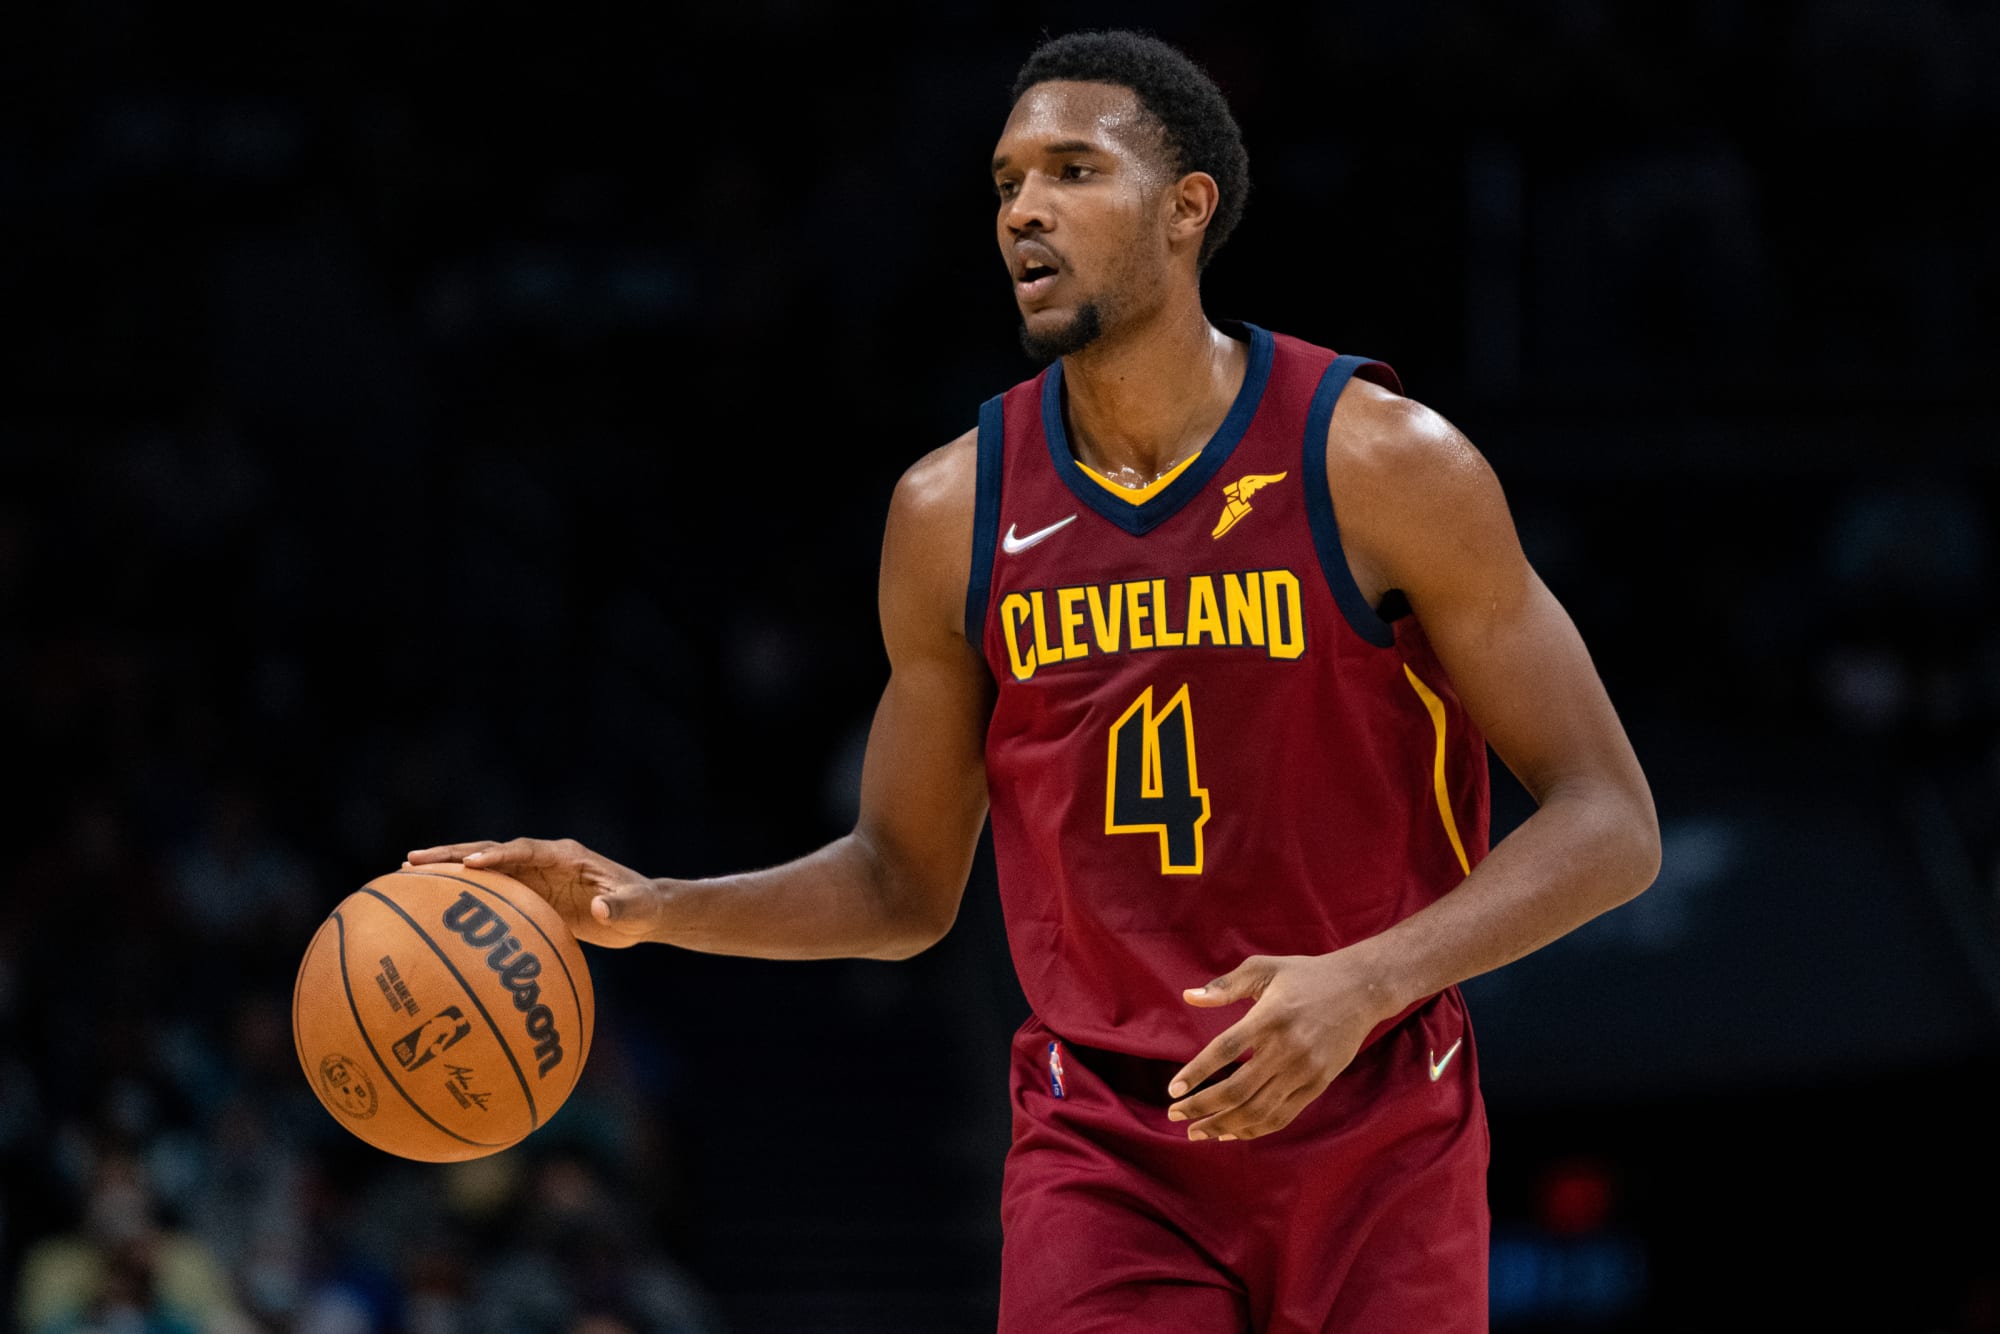 Cavs: Evan Mobley ascends to top spot in latest Kia Rookie Ladder - Page 2